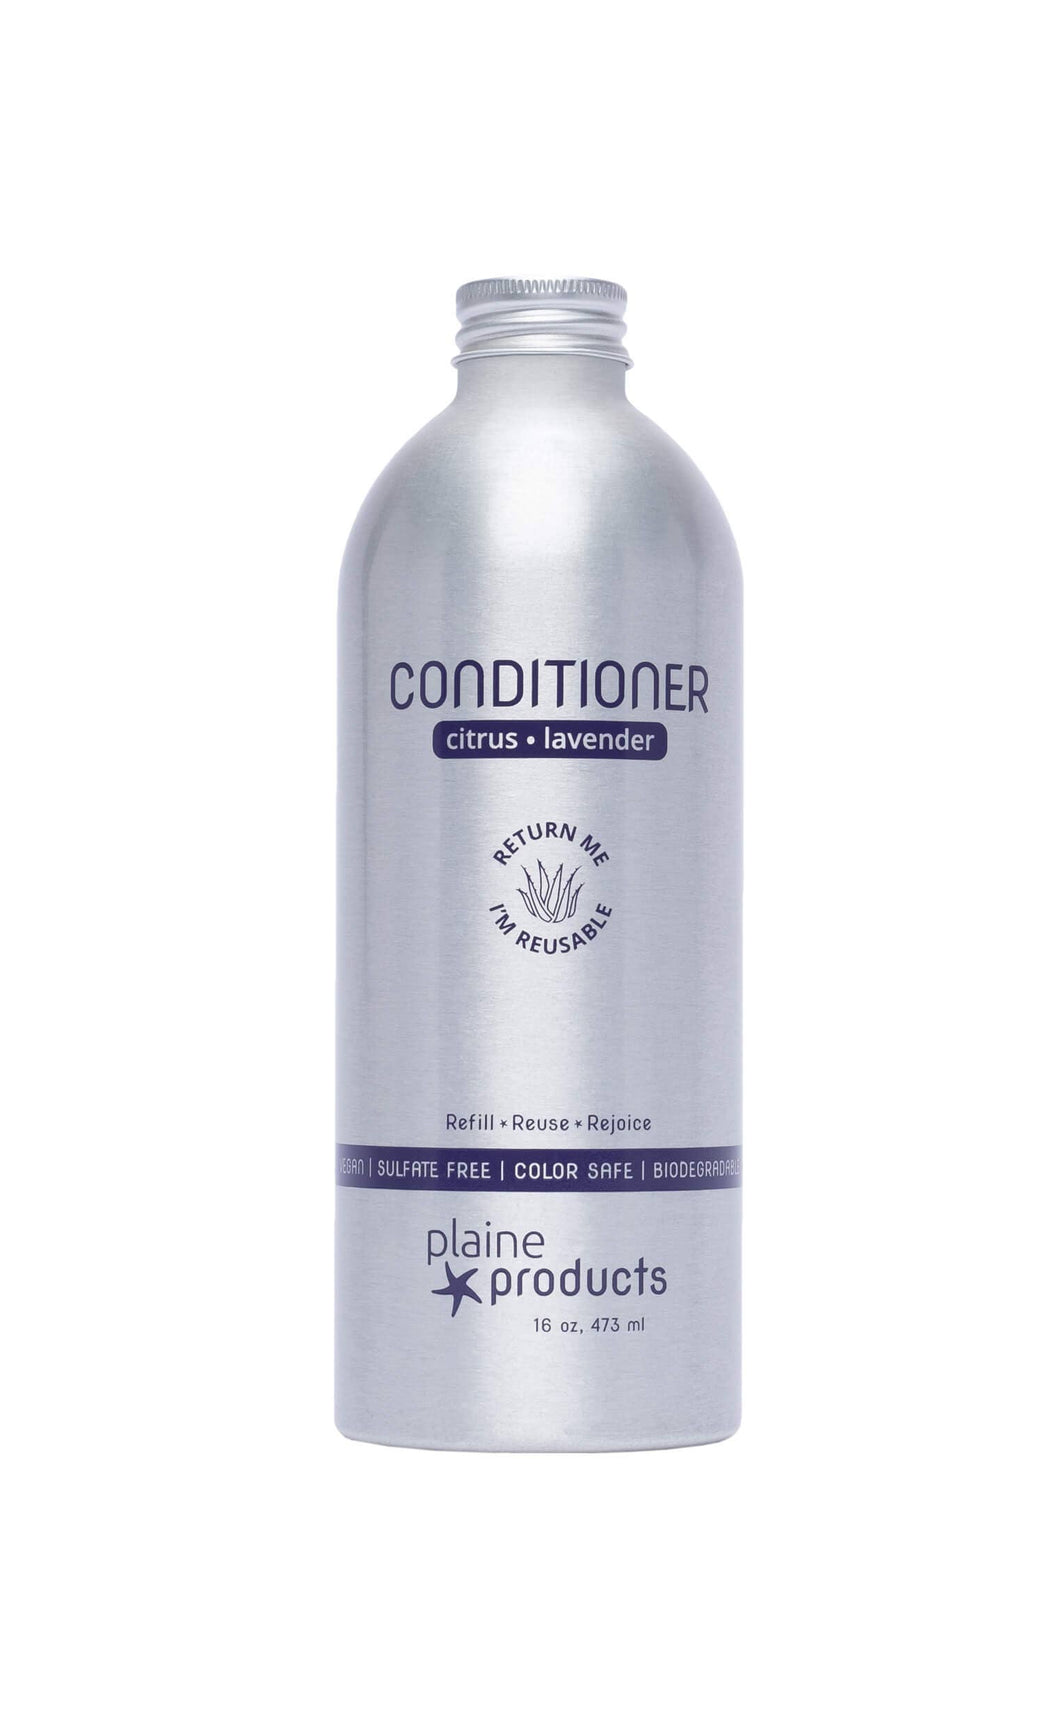 Conditioner (comes without pump)